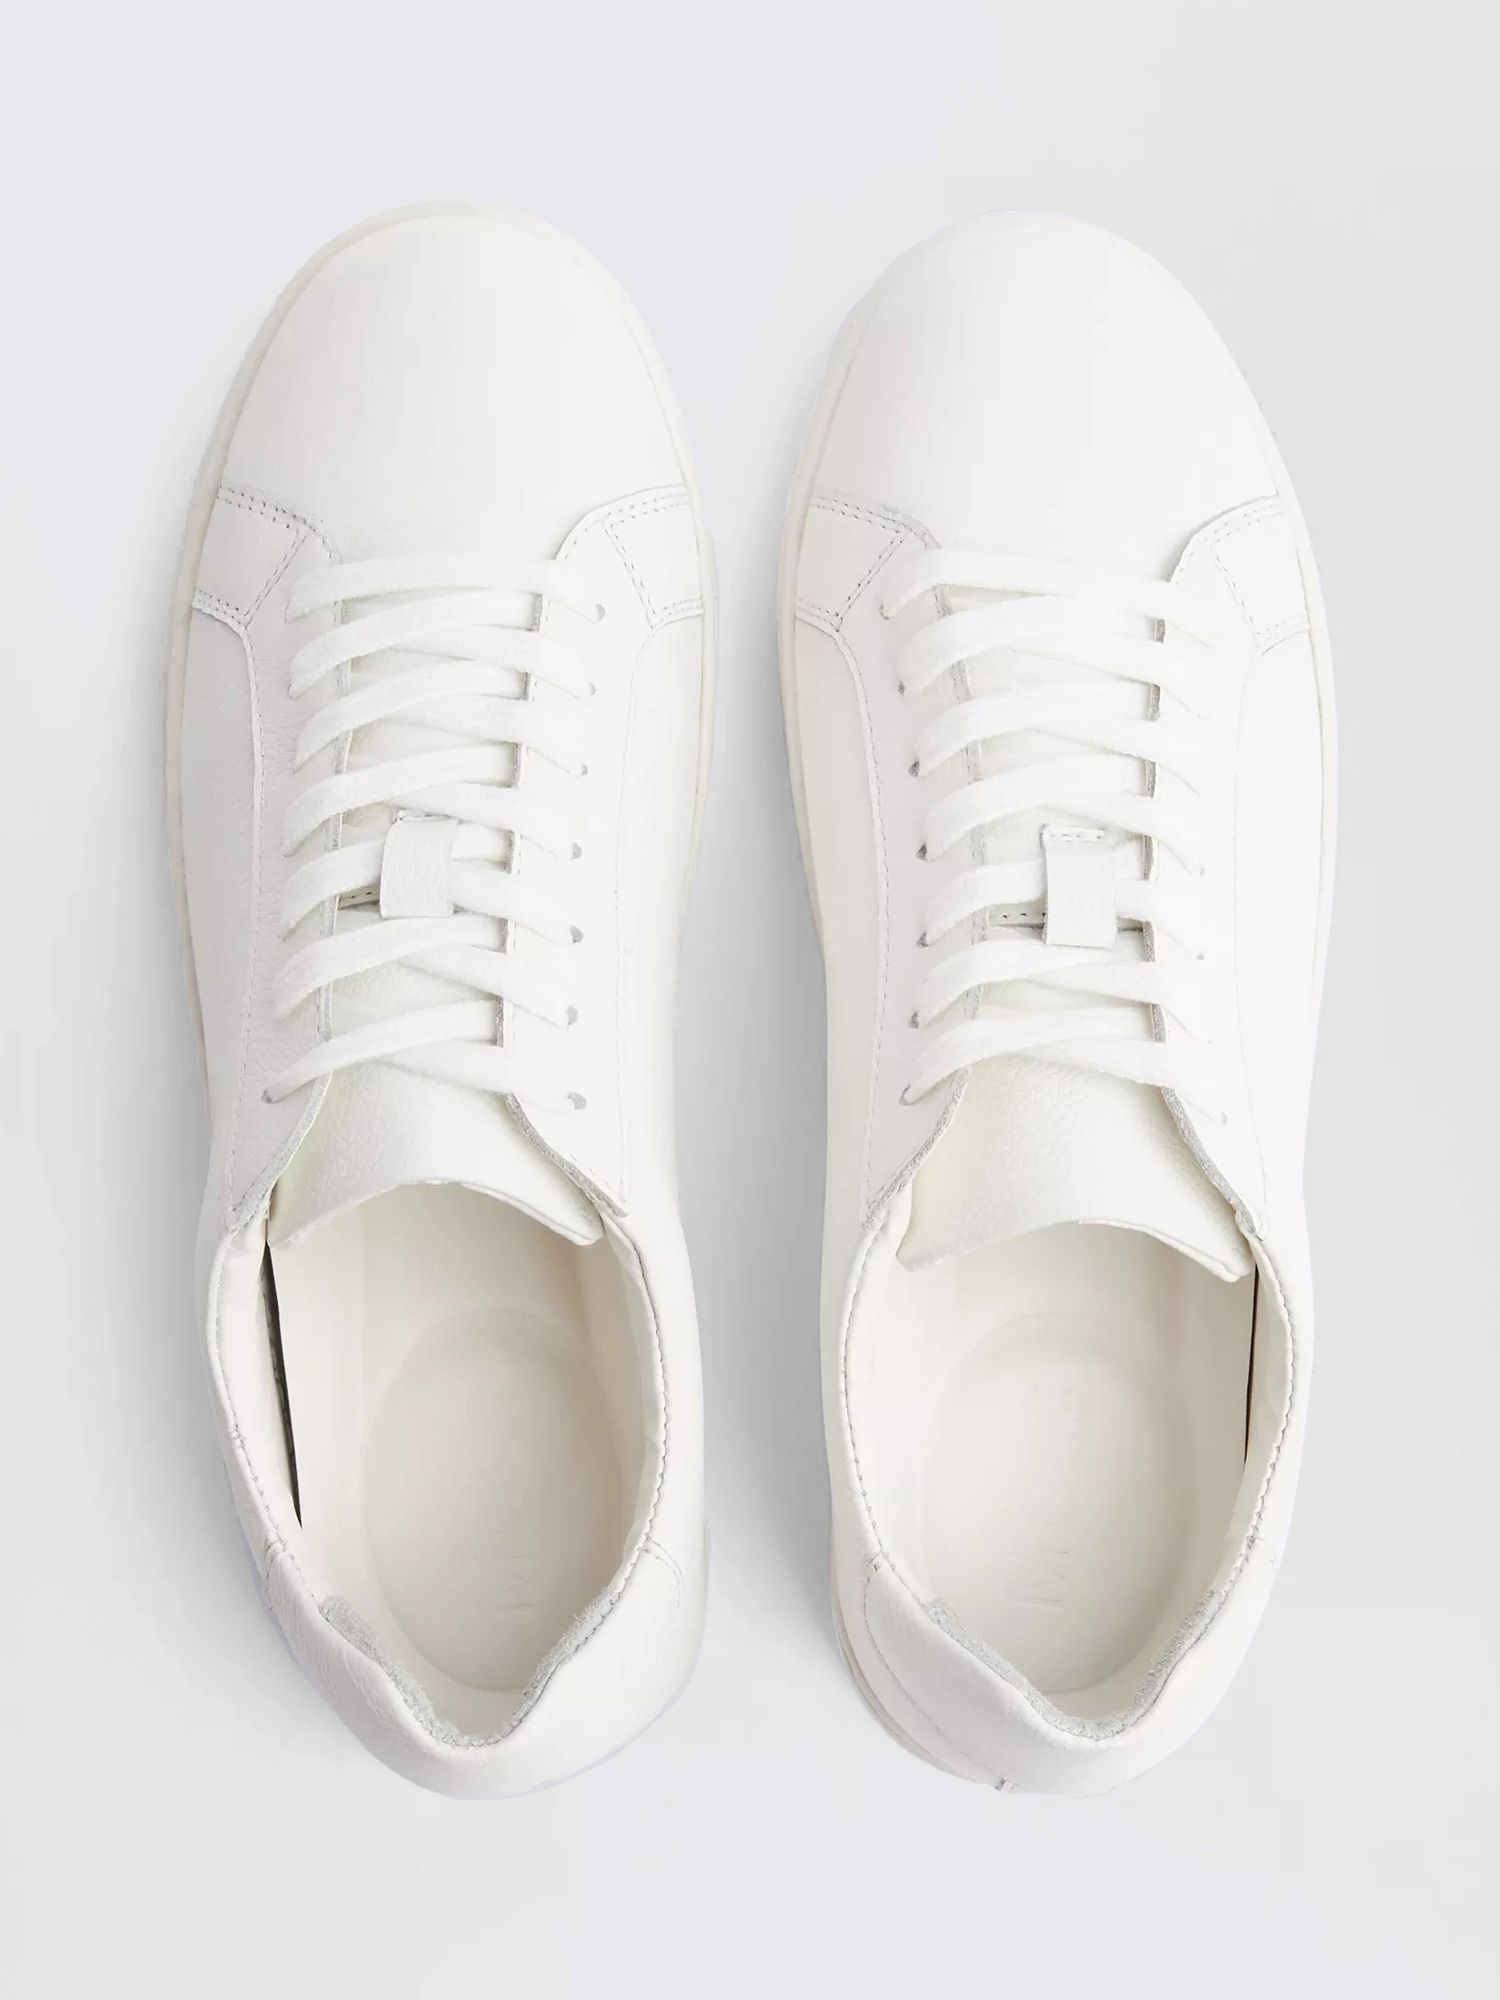 Buy Moss Leather Trainers, White Online at johnlewis.com